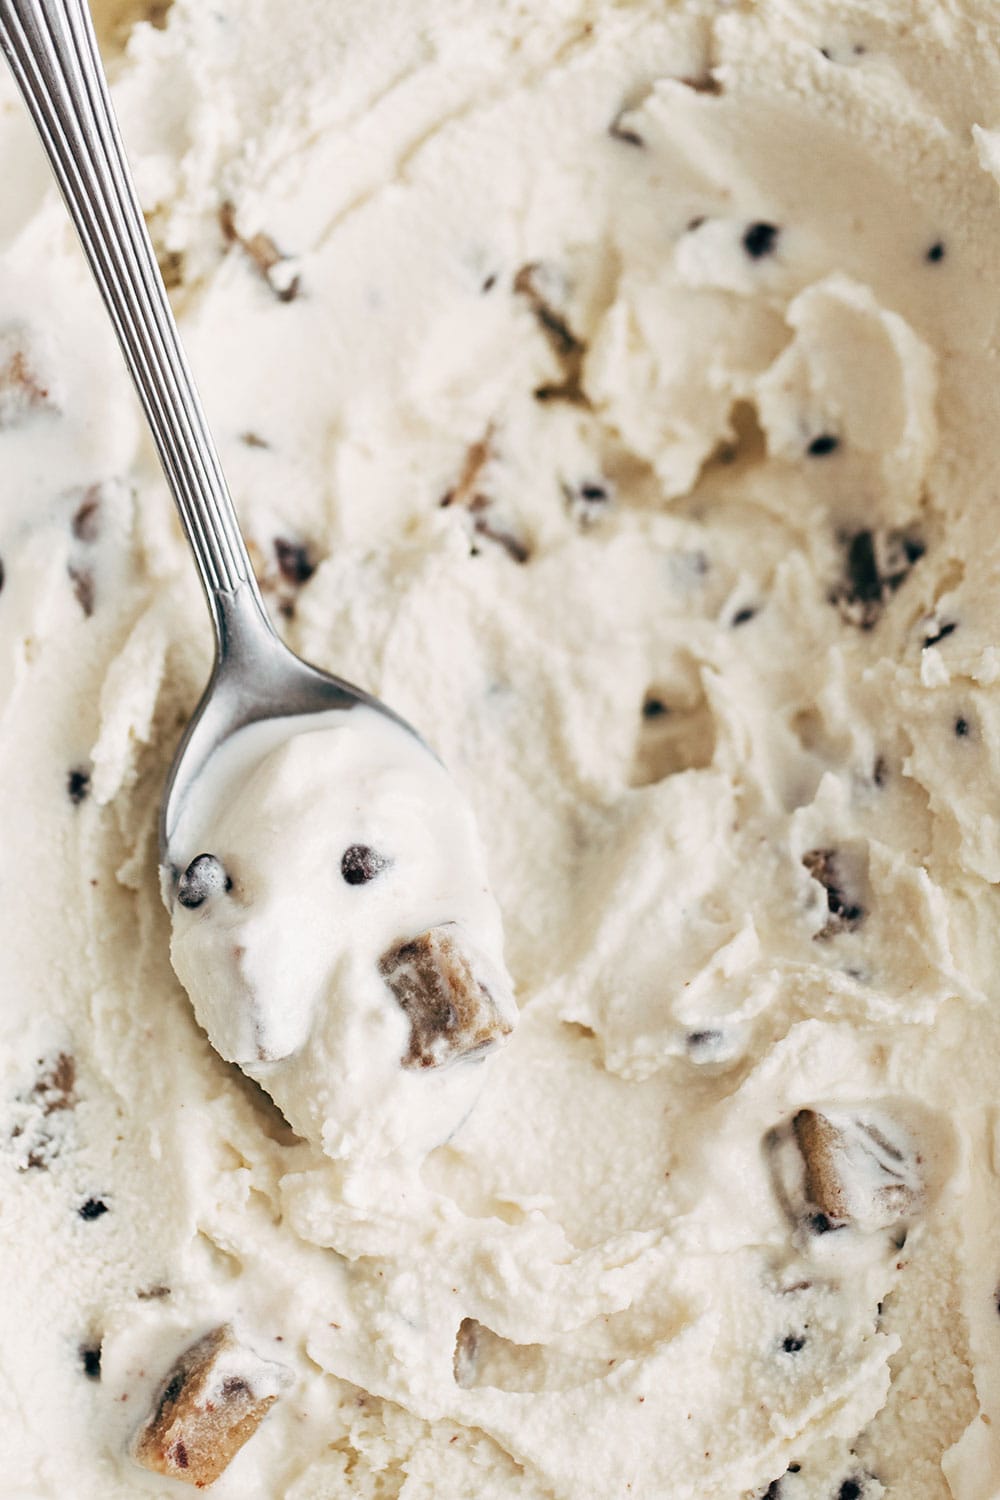 Rich and creamy chocolate chip cookie dough ice cream with spoon, ready to enjoy this summer